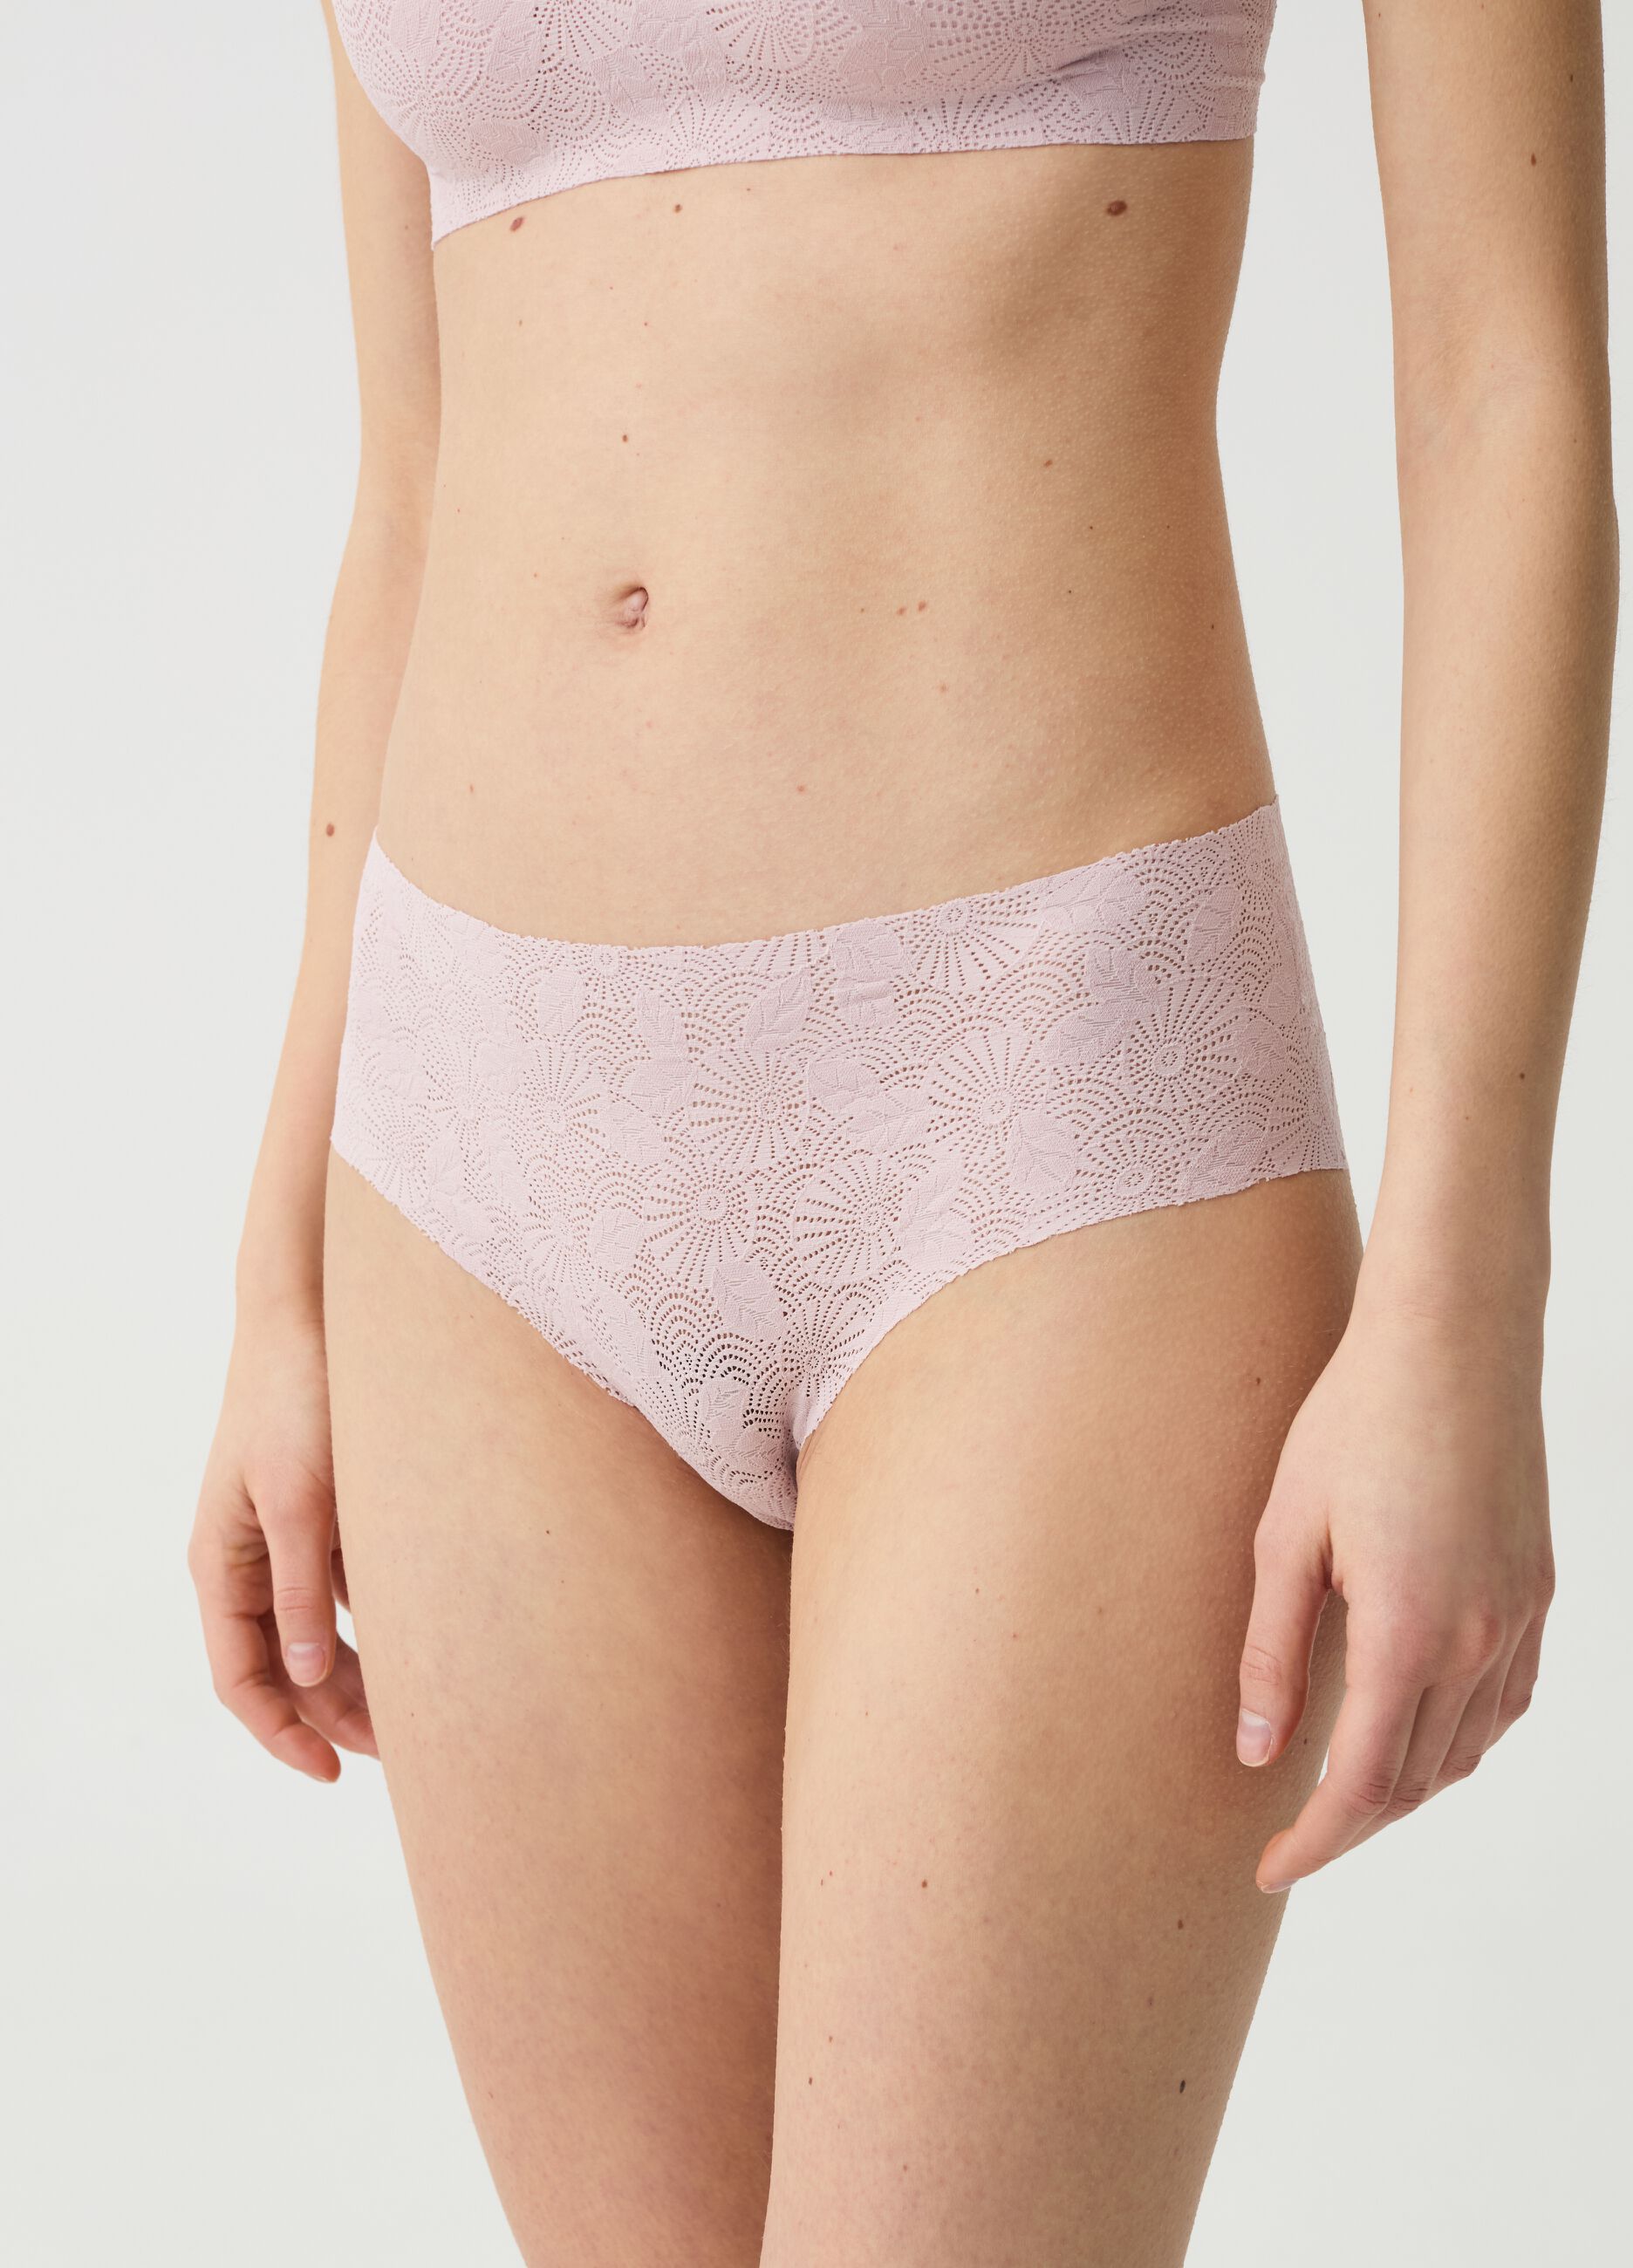 The Nude high-rise briefs with print